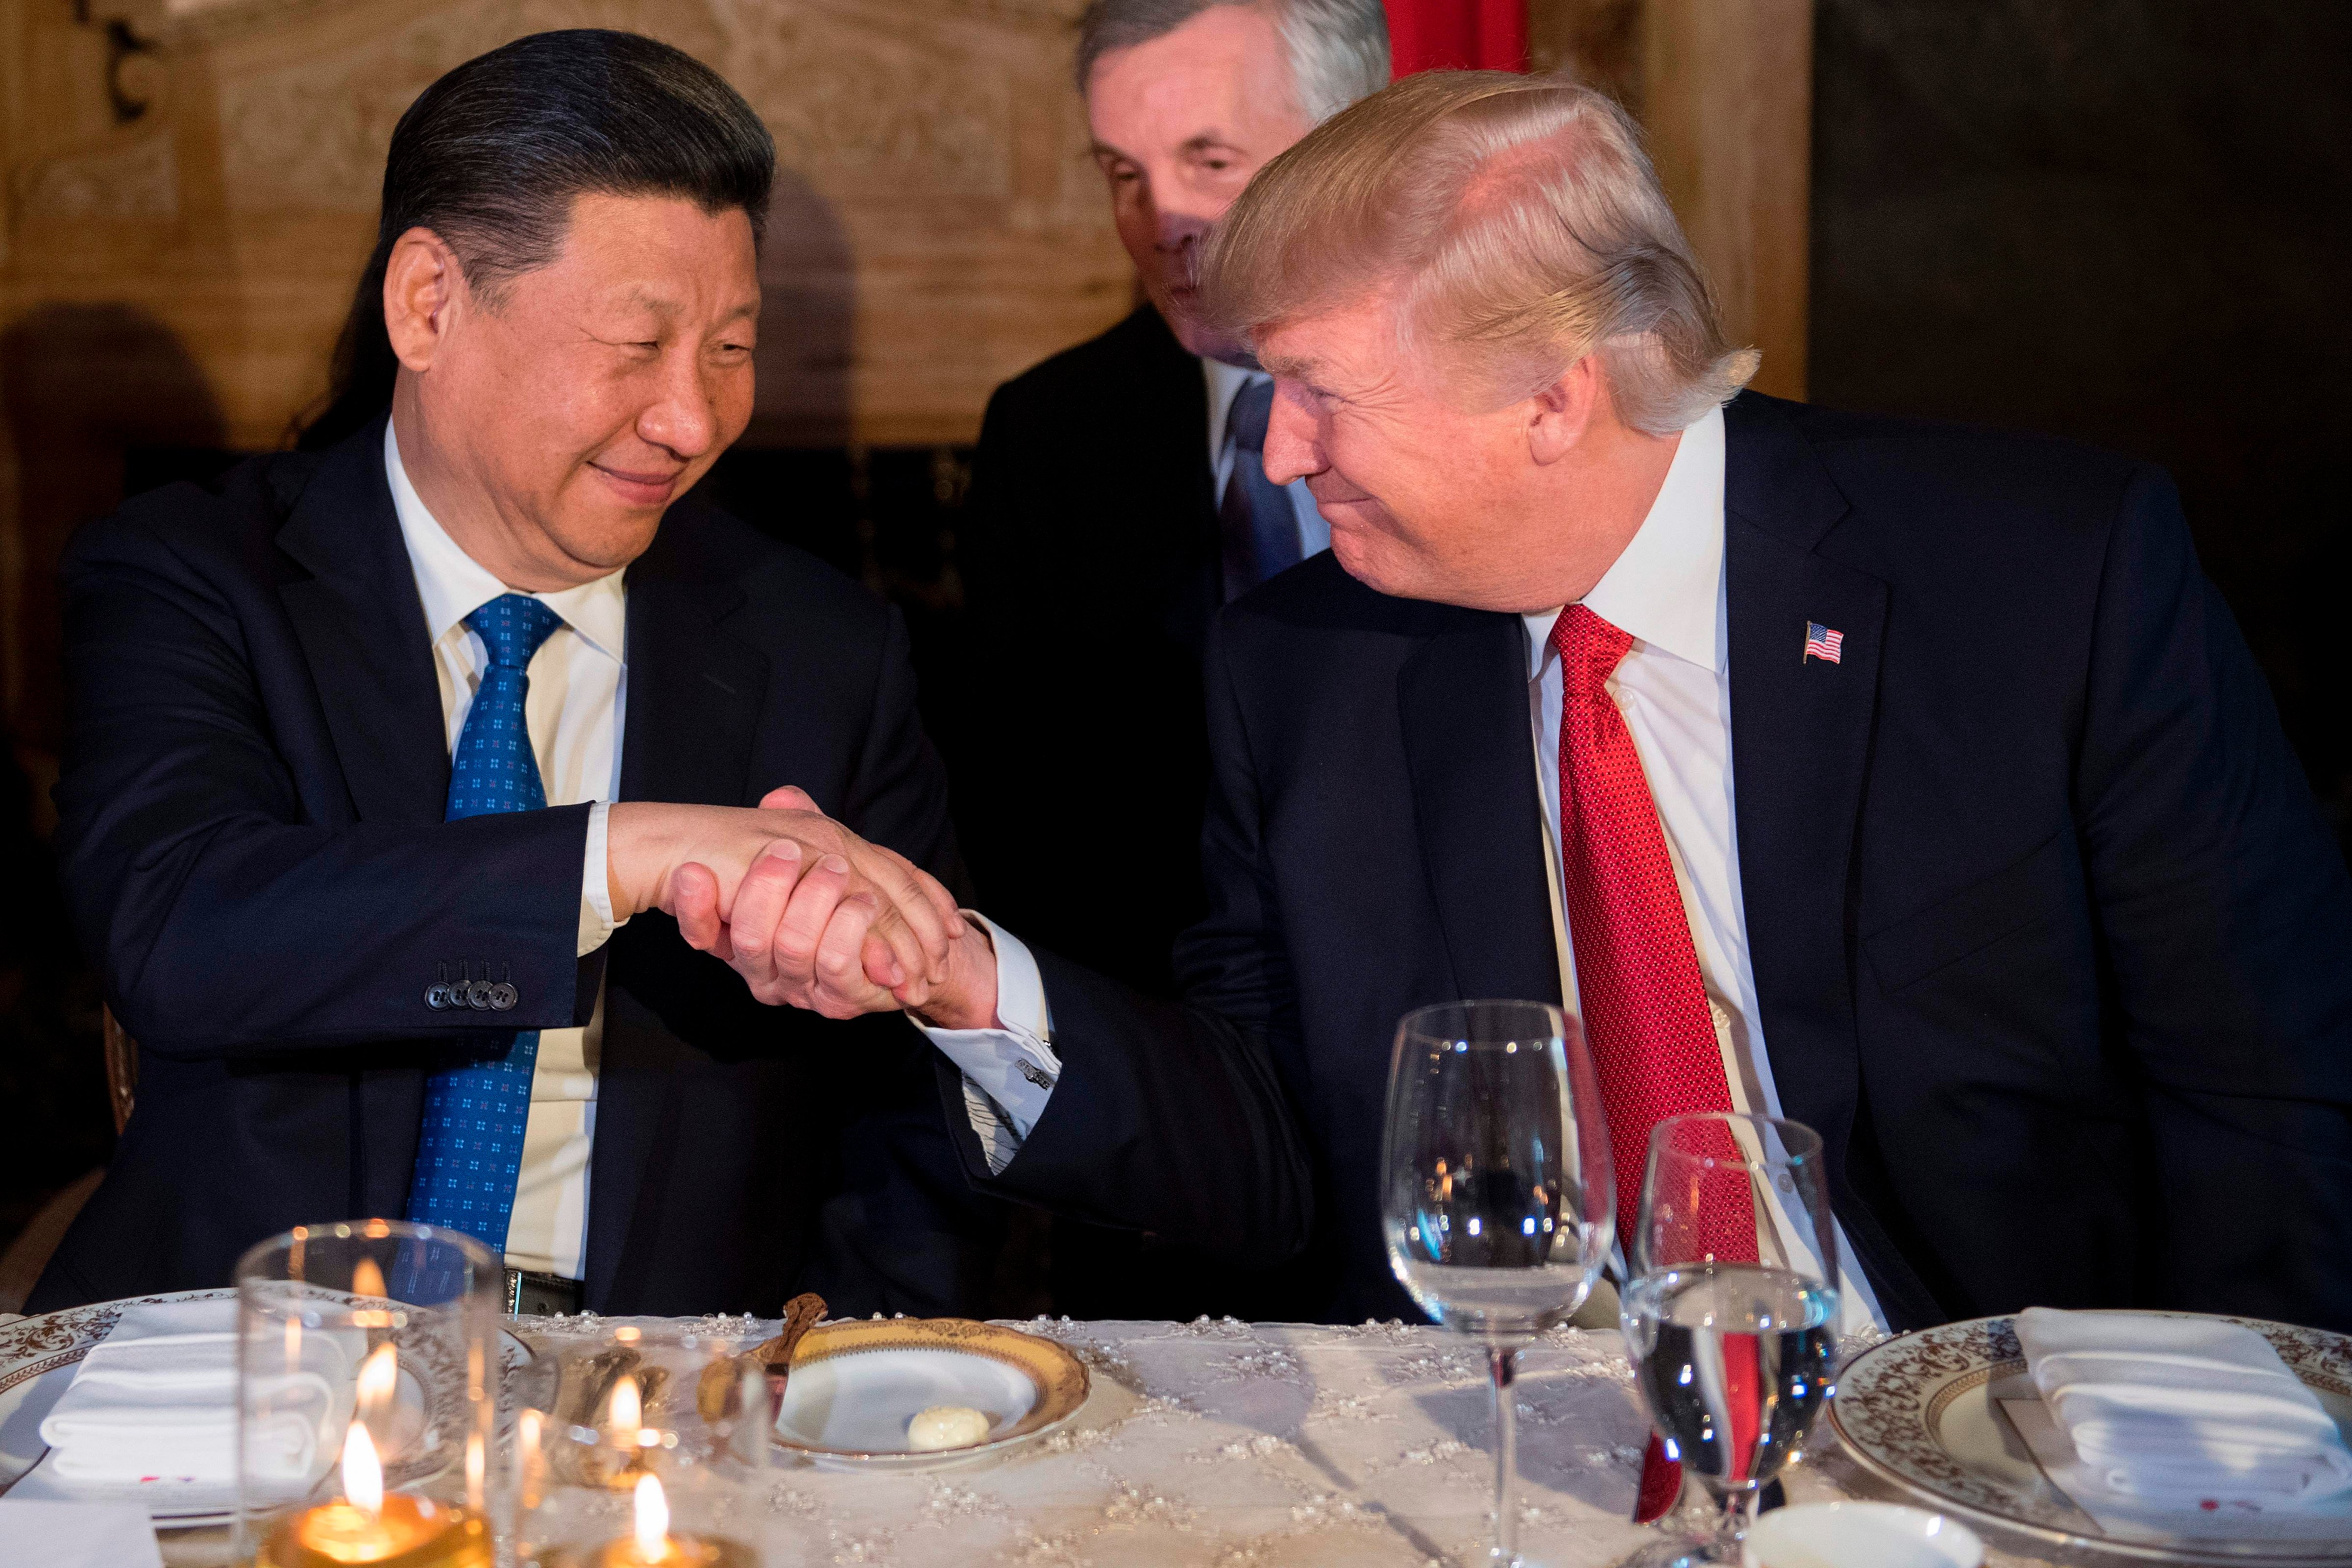 President Trump and Chinese President Xi Jinping at the Mar-a-Lago estate in West Palm Beach, Florida, on April 6, 2017. (Jim Watson—AFP/Getty Images)